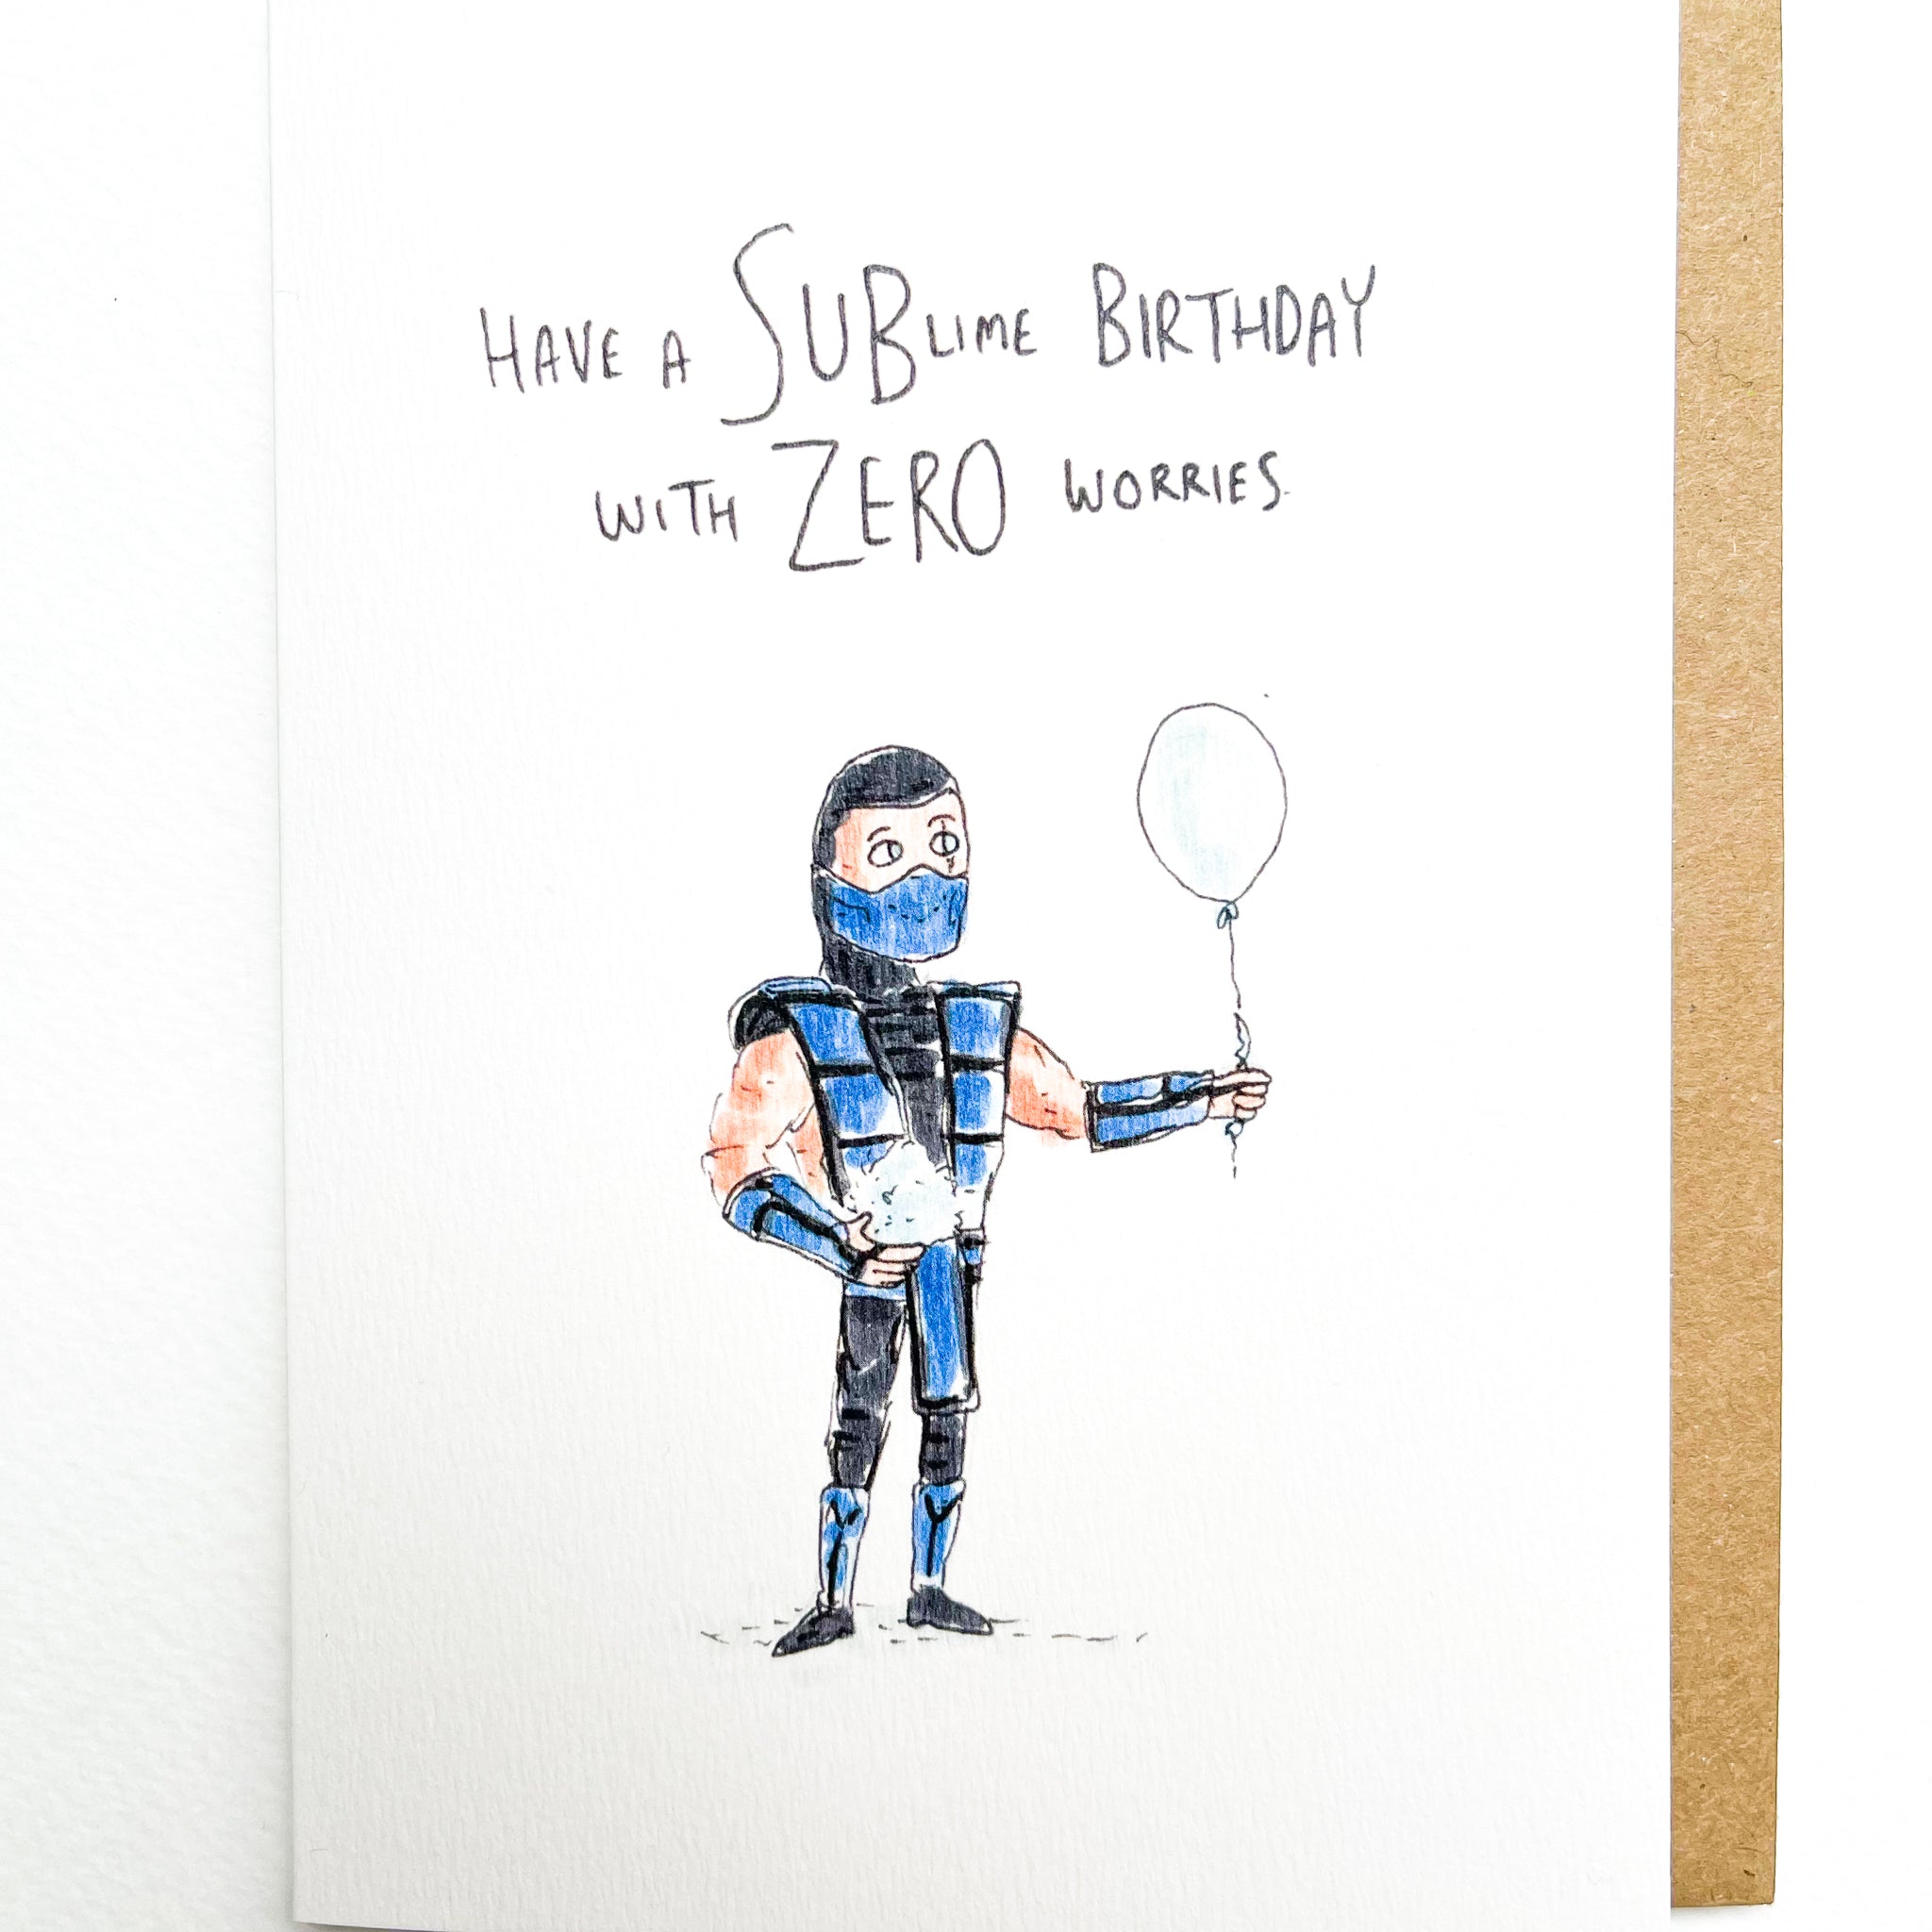 Have a SUBlime Birthday with ZERO Worries - Well Drawn